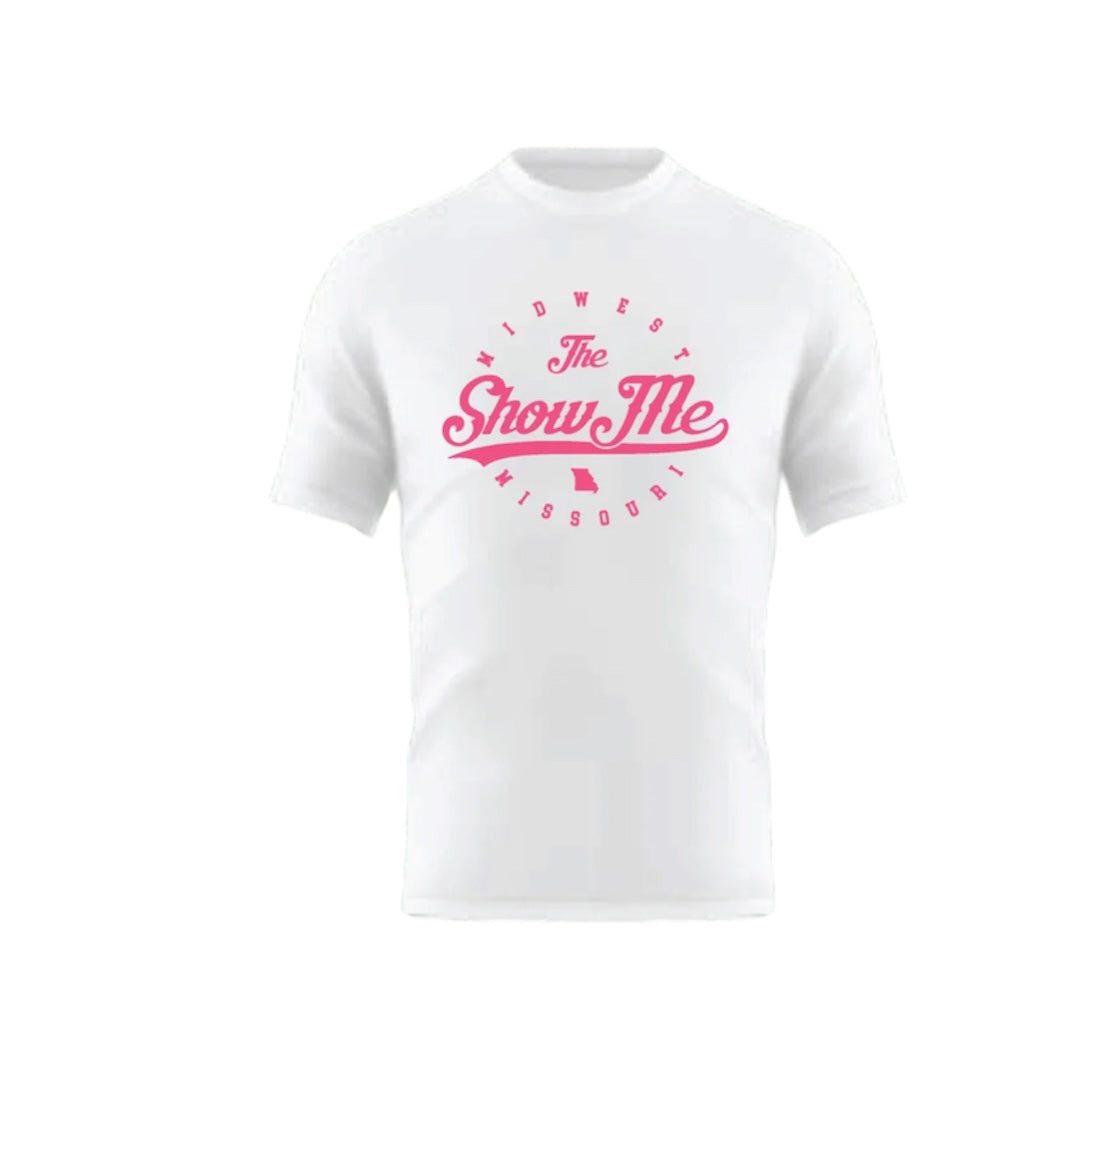 White and Pink Heavyweight Graphic T-shirt